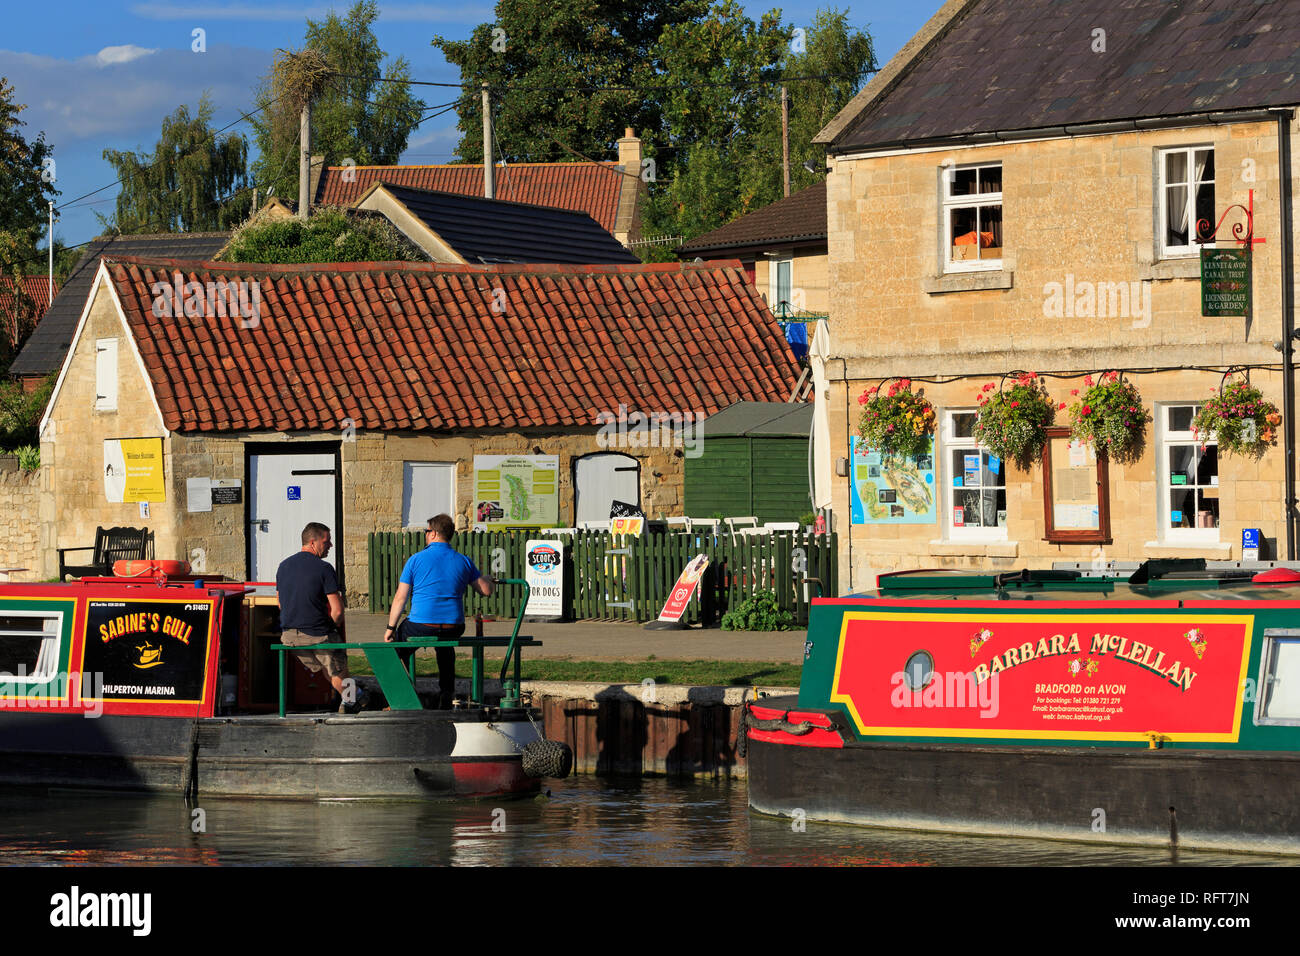 Barges, Kennet and Avon Canal, Bradford on Avon, Wiltshire, England, United Kingdom, Euruope Stock Photo